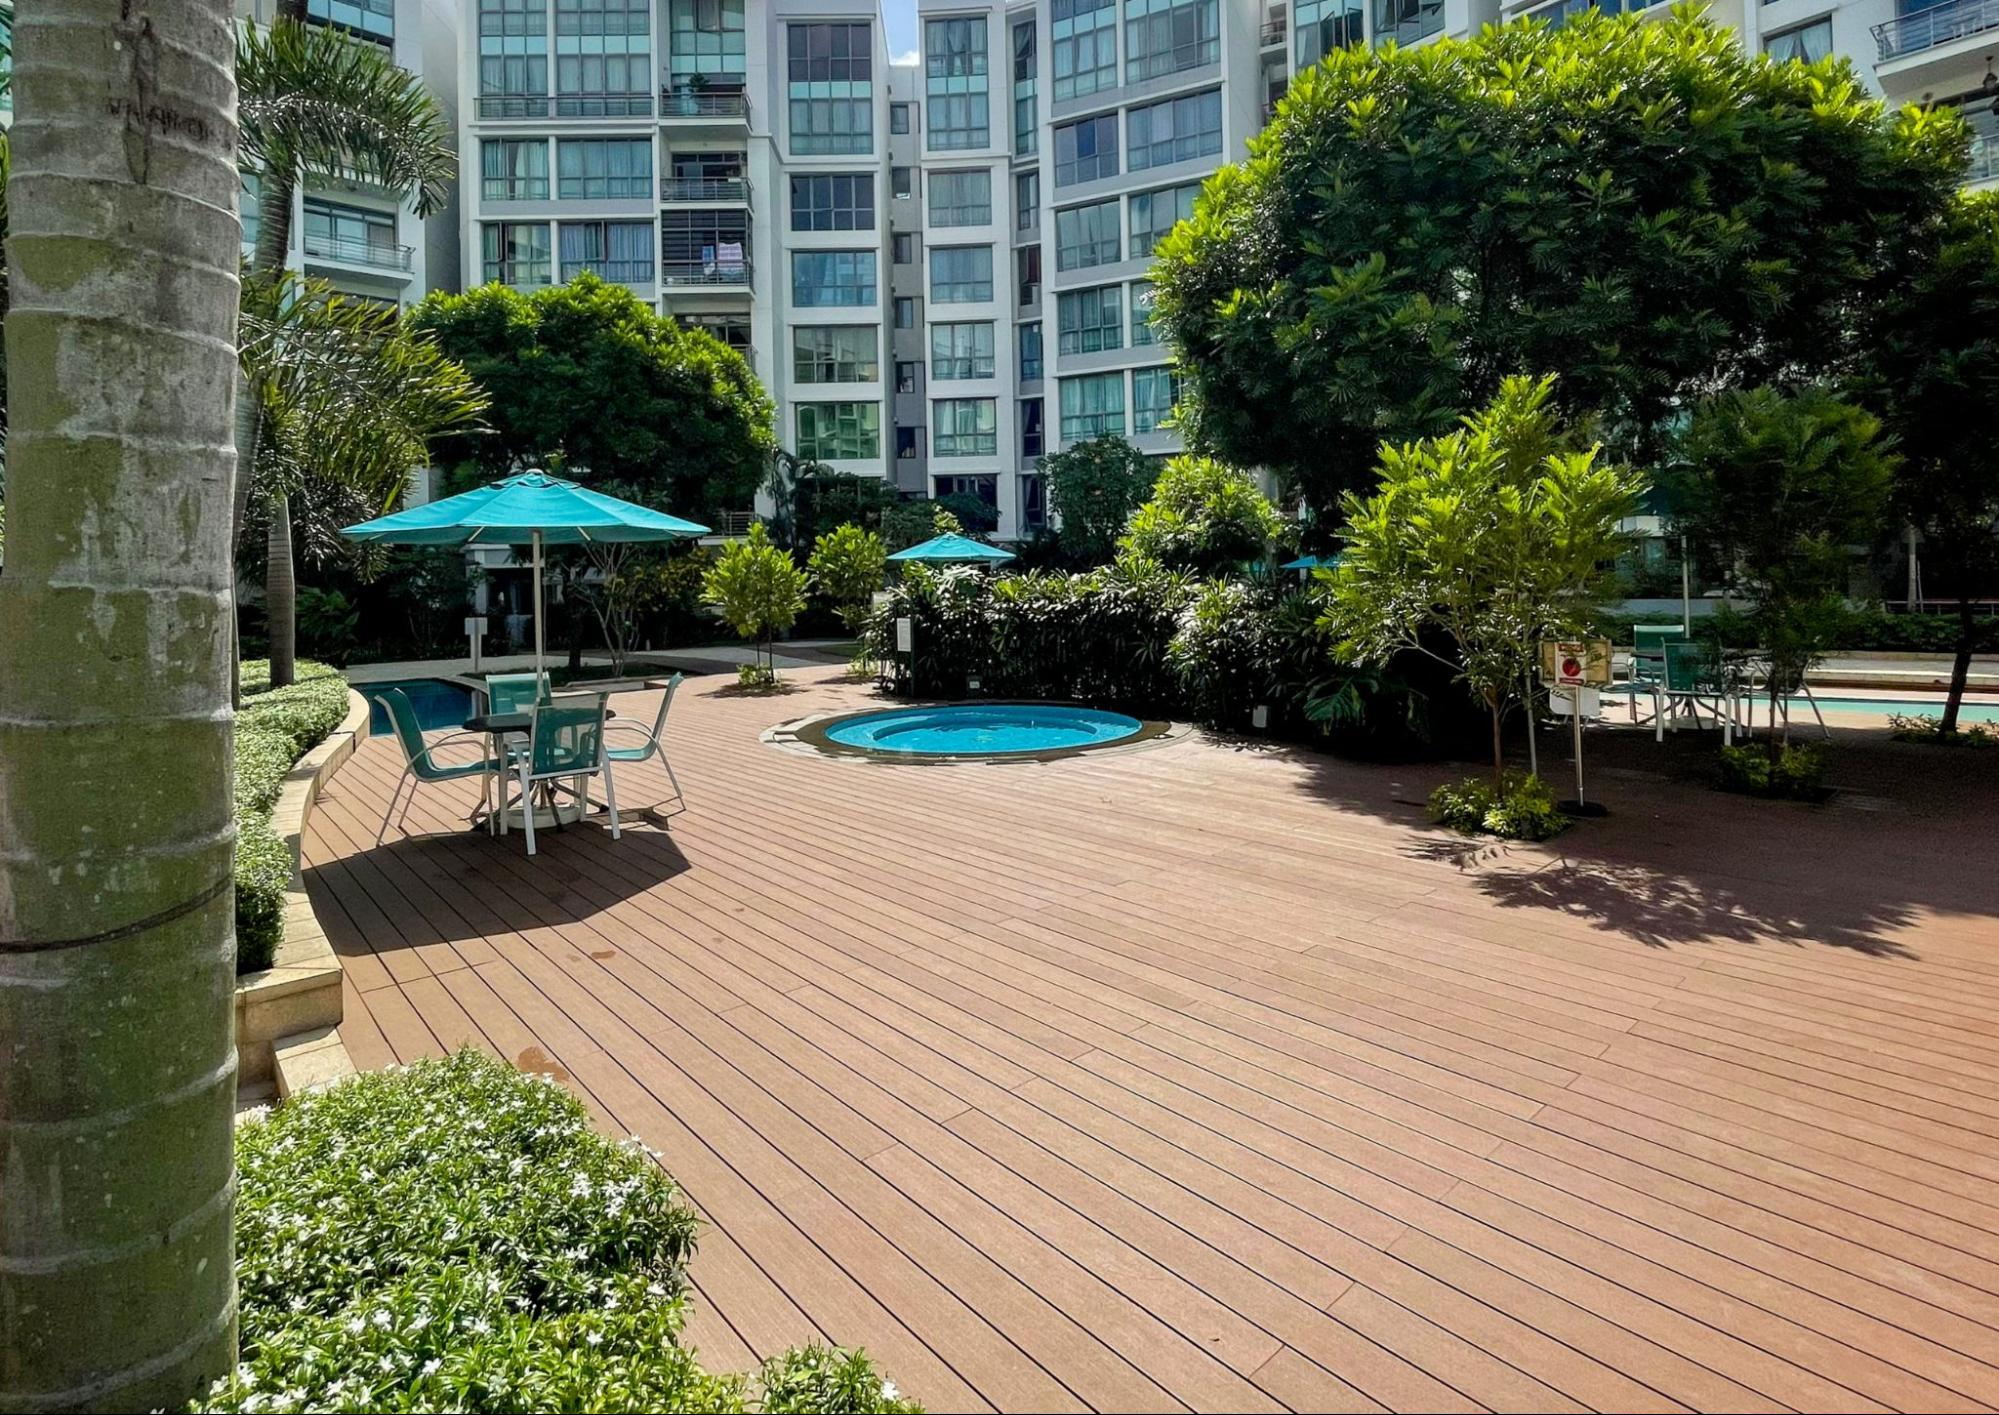 composite or wood decking—how to make the right choice - Composite or Wood Decking—How to Make the Right Choice?